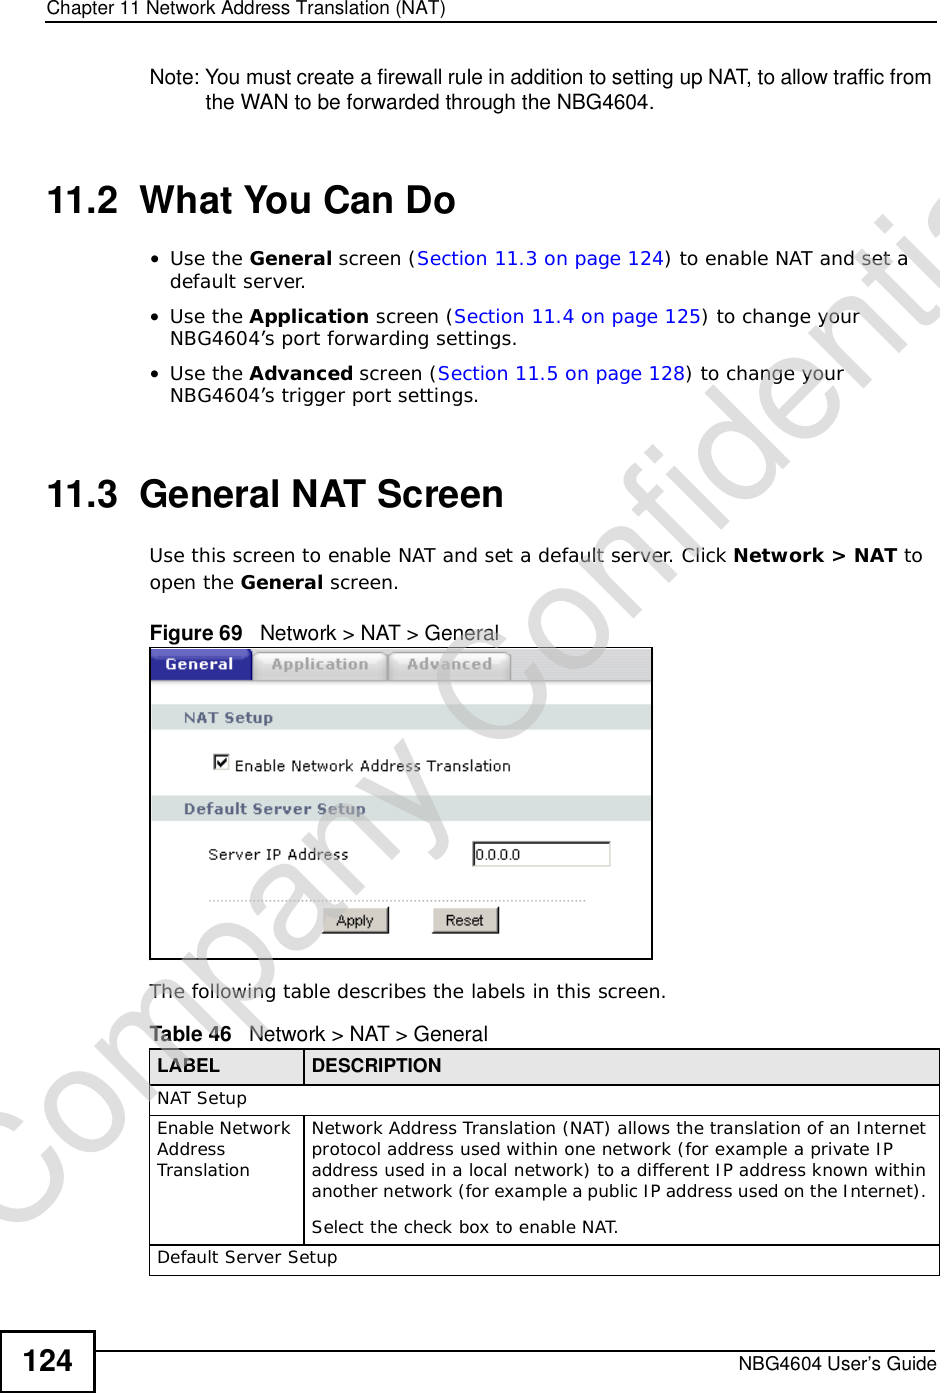 Chapter 11Network Address Translation (NAT)NBG4604 User’s Guide124Note: You must create a firewall rule in addition to setting up NAT, to allow traffic from the WAN to be forwarded through the NBG4604.11.2  What You Can Do•Use the General screen (Section 11.3 on page 124) to enable NAT and set a default server.•Use the Application screen (Section 11.4 on page 125) to change your NBG4604’s port forwarding settings.•Use the Advanced screen (Section 11.5 on page 128) to change your NBG4604’s trigger port settings.11.3  General NAT ScreenUse this screen to enable NAT and set a default server. Click Network &gt; NAT to open the General screen.Figure 69   Network &gt; NAT &gt; General The following table describes the labels in this screen.Table 46   Network &gt; NAT &gt; GeneralLABEL DESCRIPTIONNAT SetupEnable Network AddressTranslationNetwork Address Translation (NAT) allows the translation of an Internet protocol address used within one network (for example a private IP address used in a local network) to a different IP address known within another network (for example a public IP address used on the Internet). Select the check box to enable NAT.Default Server SetupCompany Confidential